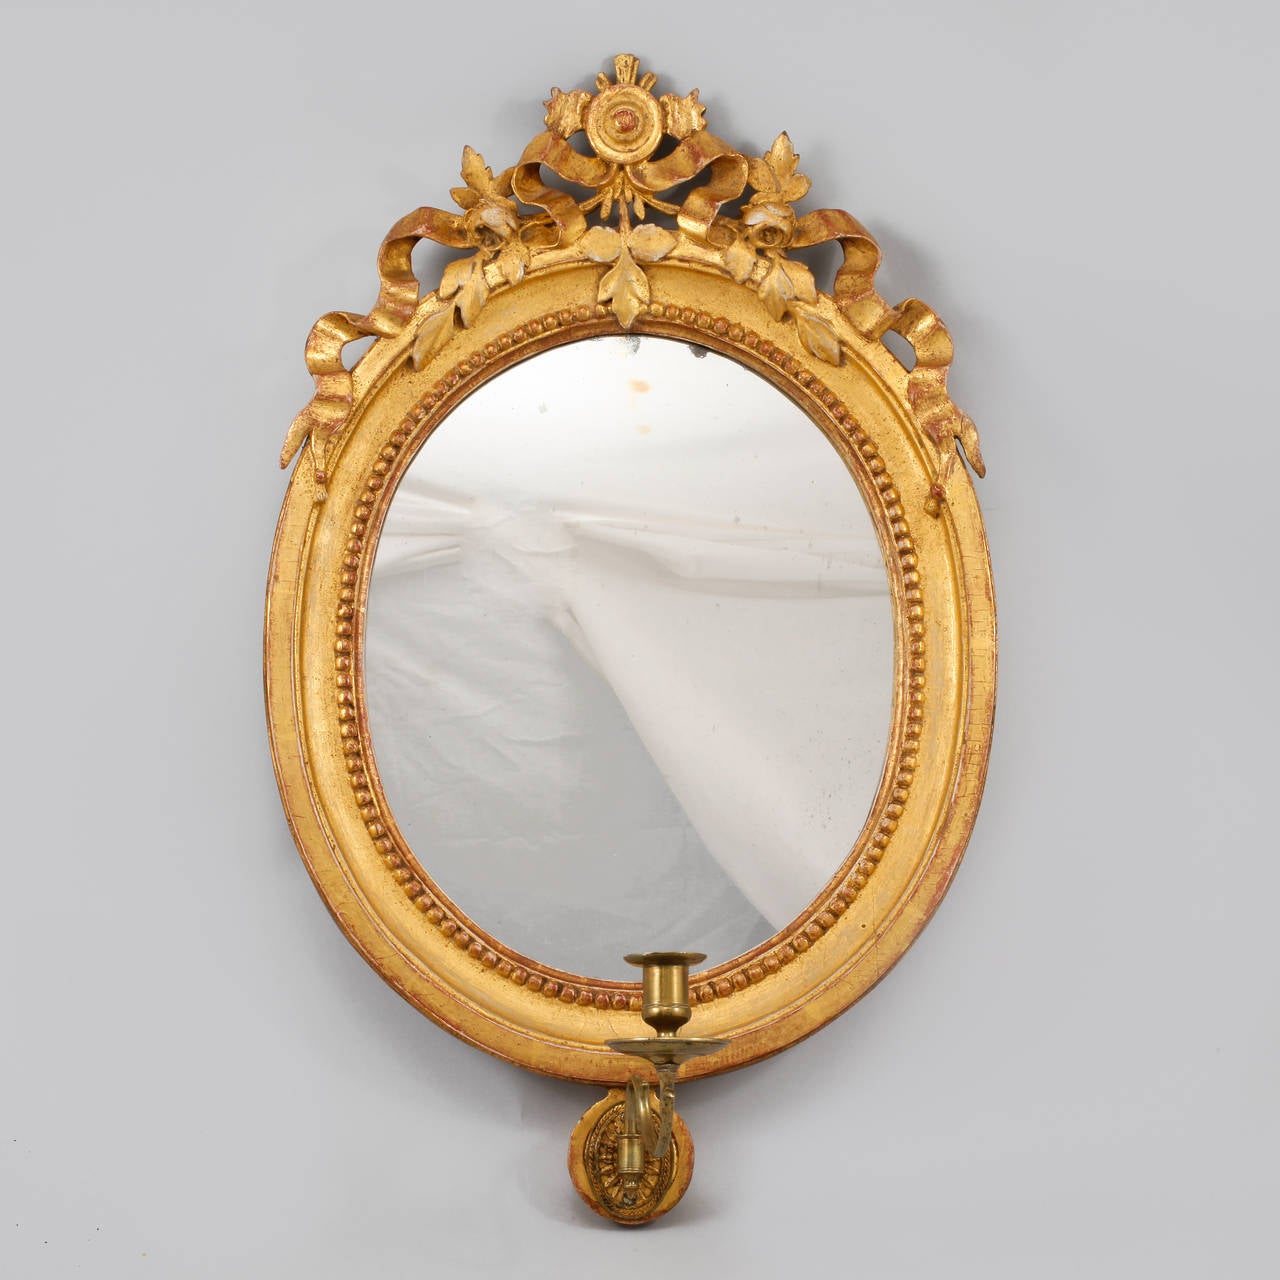 Pair of 18th century oval Swedish gustavian carved gilt wood girandole mirrors with bronze candleholders.